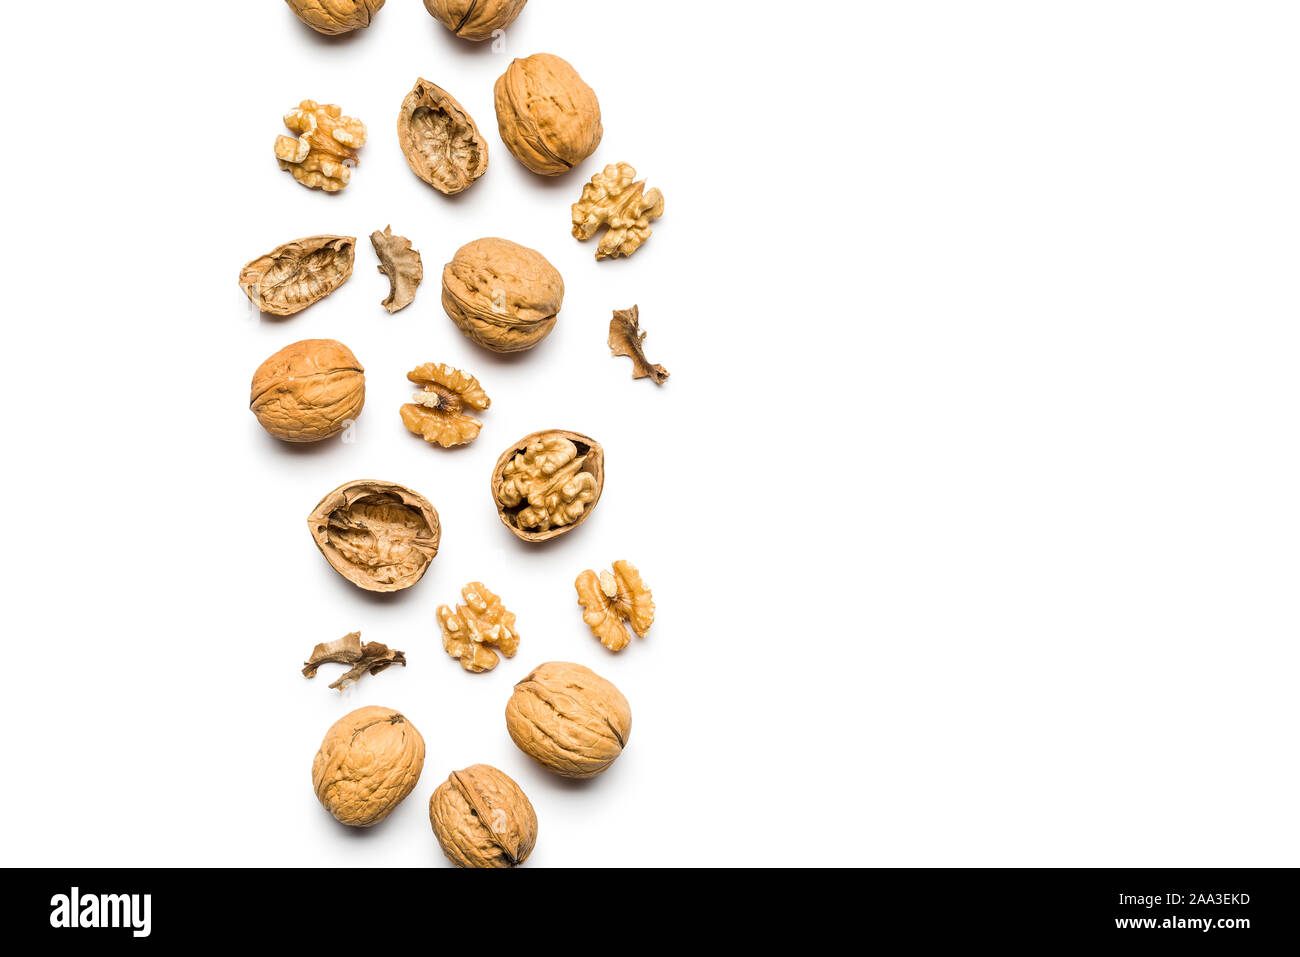 top view of walnuts closed and broken scattered on a white background with copy space Stock Photo